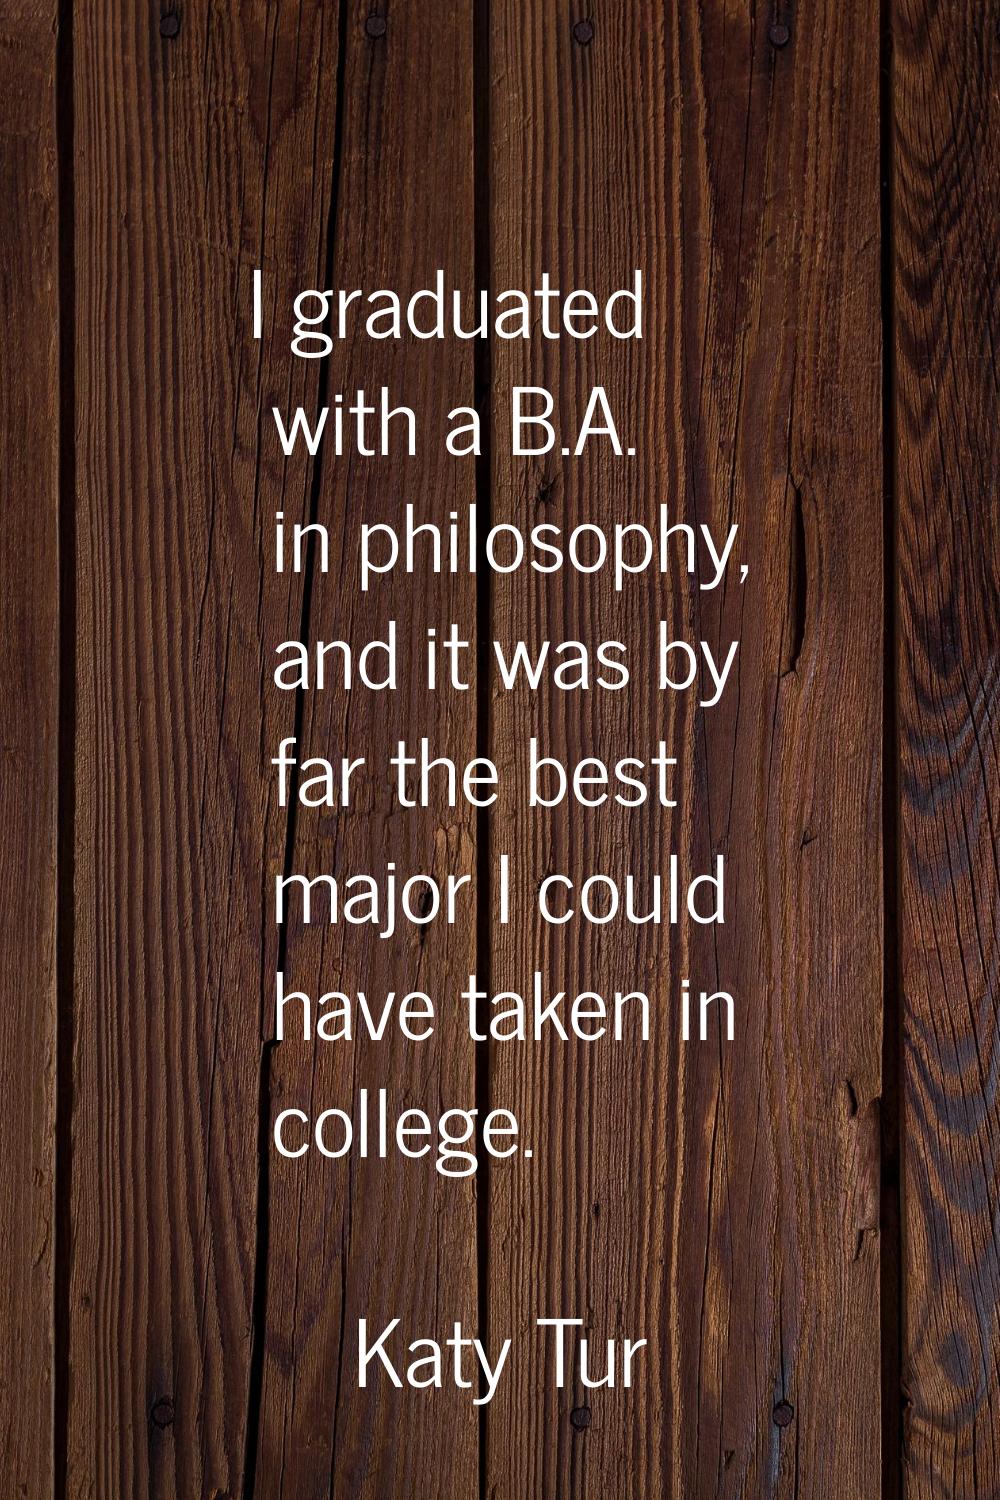 I graduated with a B.A. in philosophy, and it was by far the best major I could have taken in colle